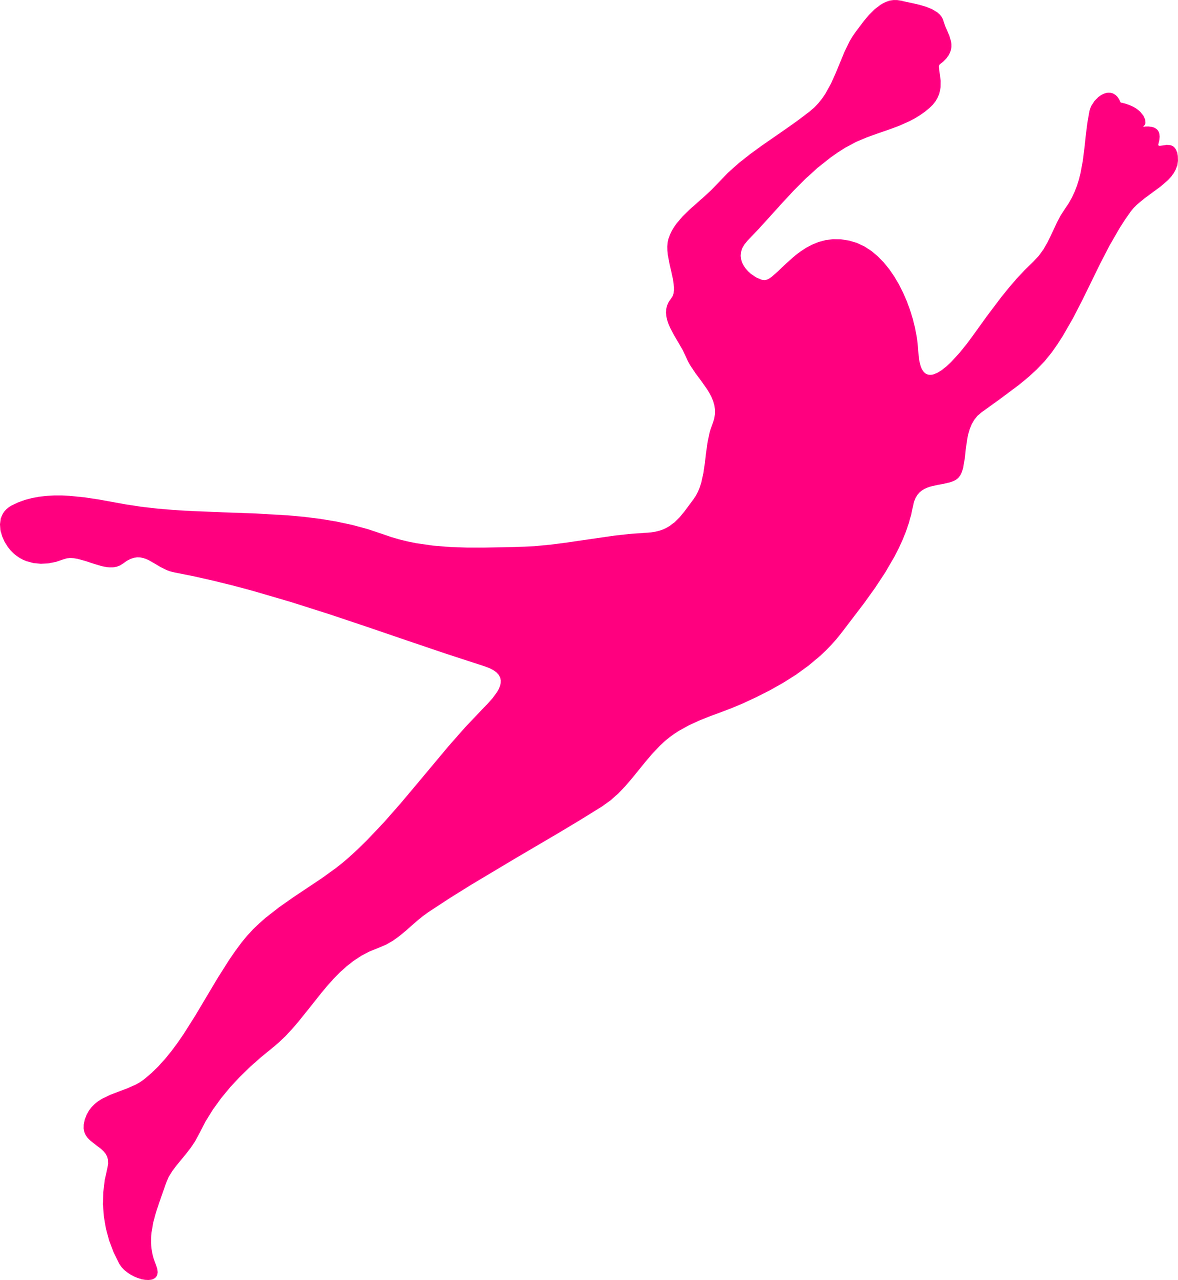 Girl Jumping Pink Silhouette Png Image Goalkeeper Vector